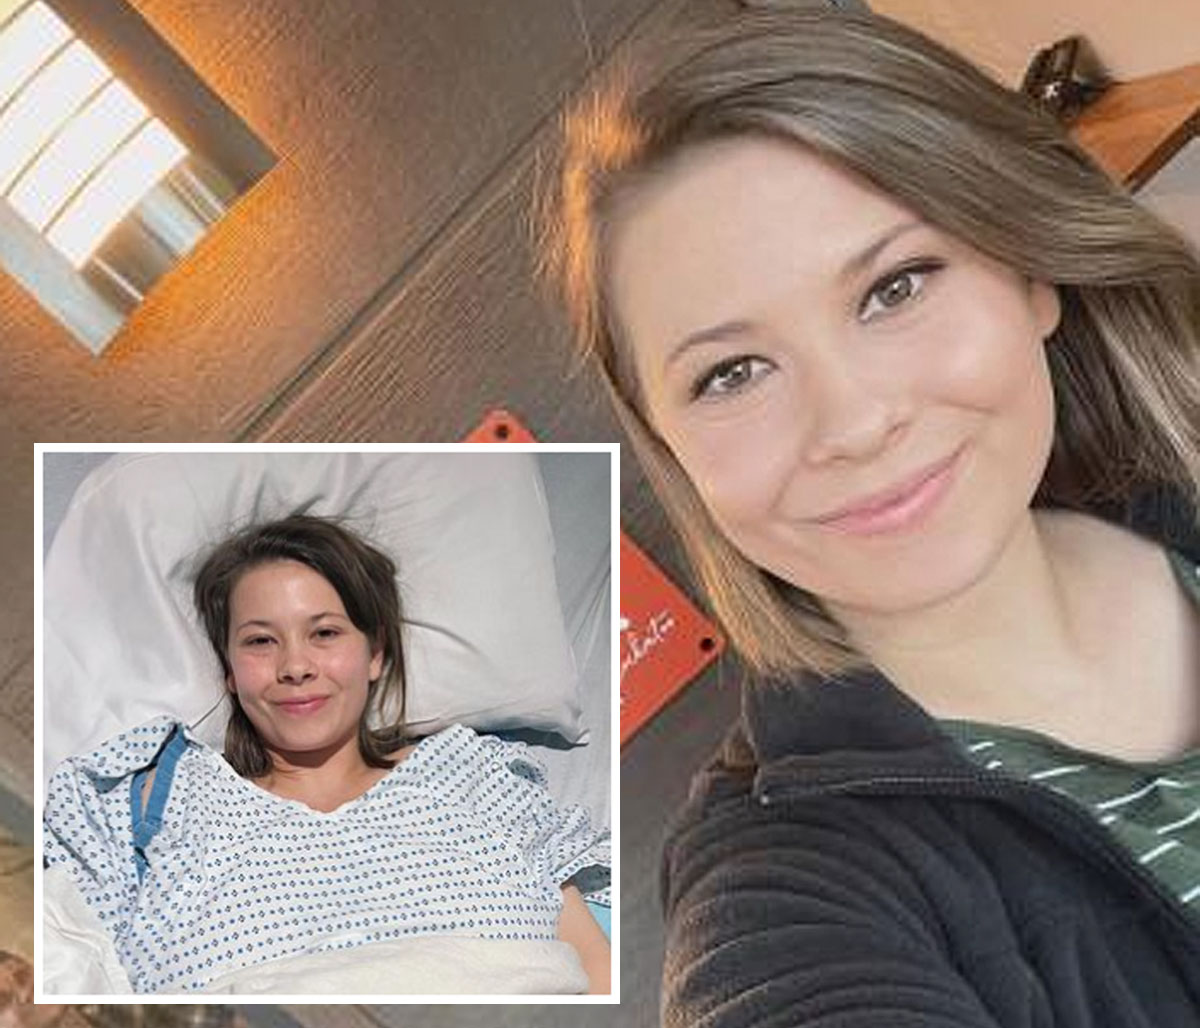 Bindi Irwin reveals endometriosis diagnosis after 10 years of pain  ‘Indescribable’ and no answer – Perez Hilton